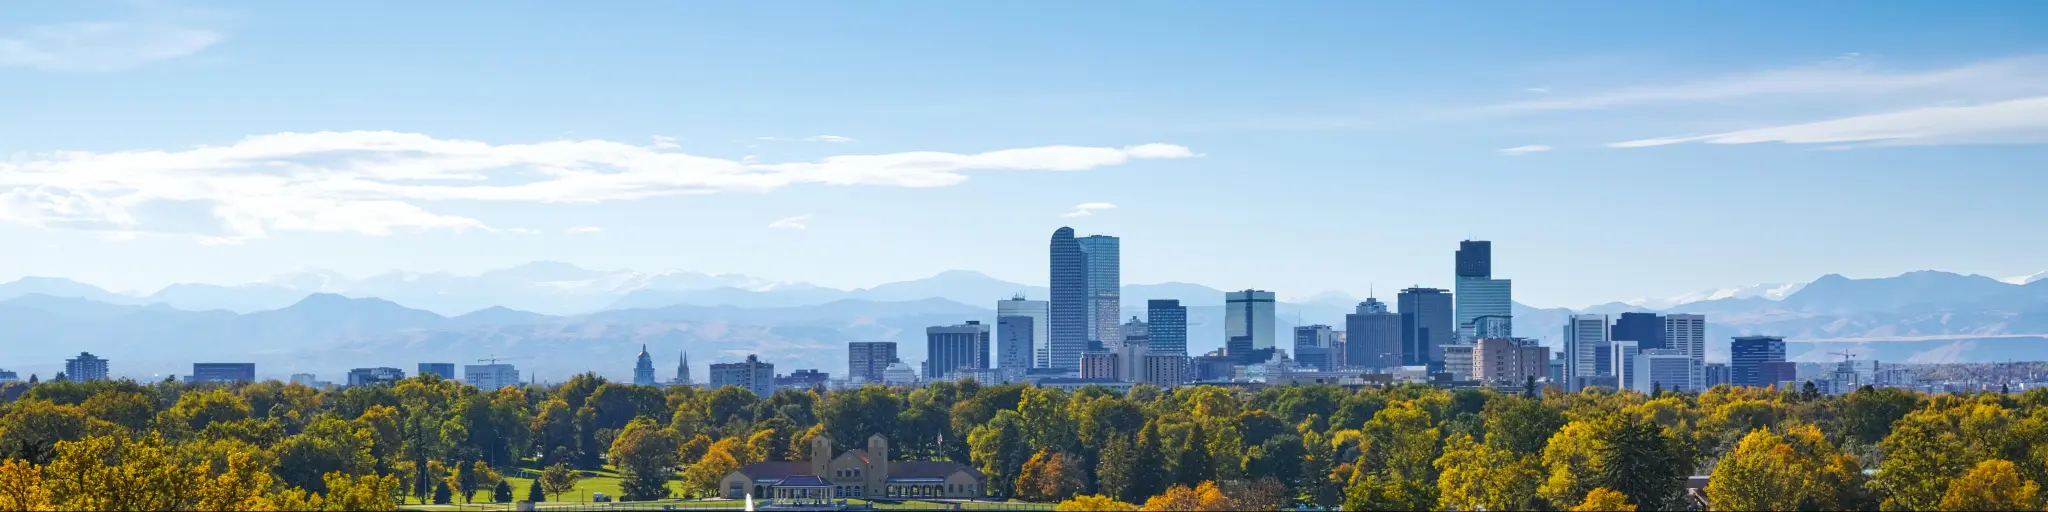 Panoramic view of high rise buildings of Denver skyline with green trees in the foreground and rocky mountains in the background